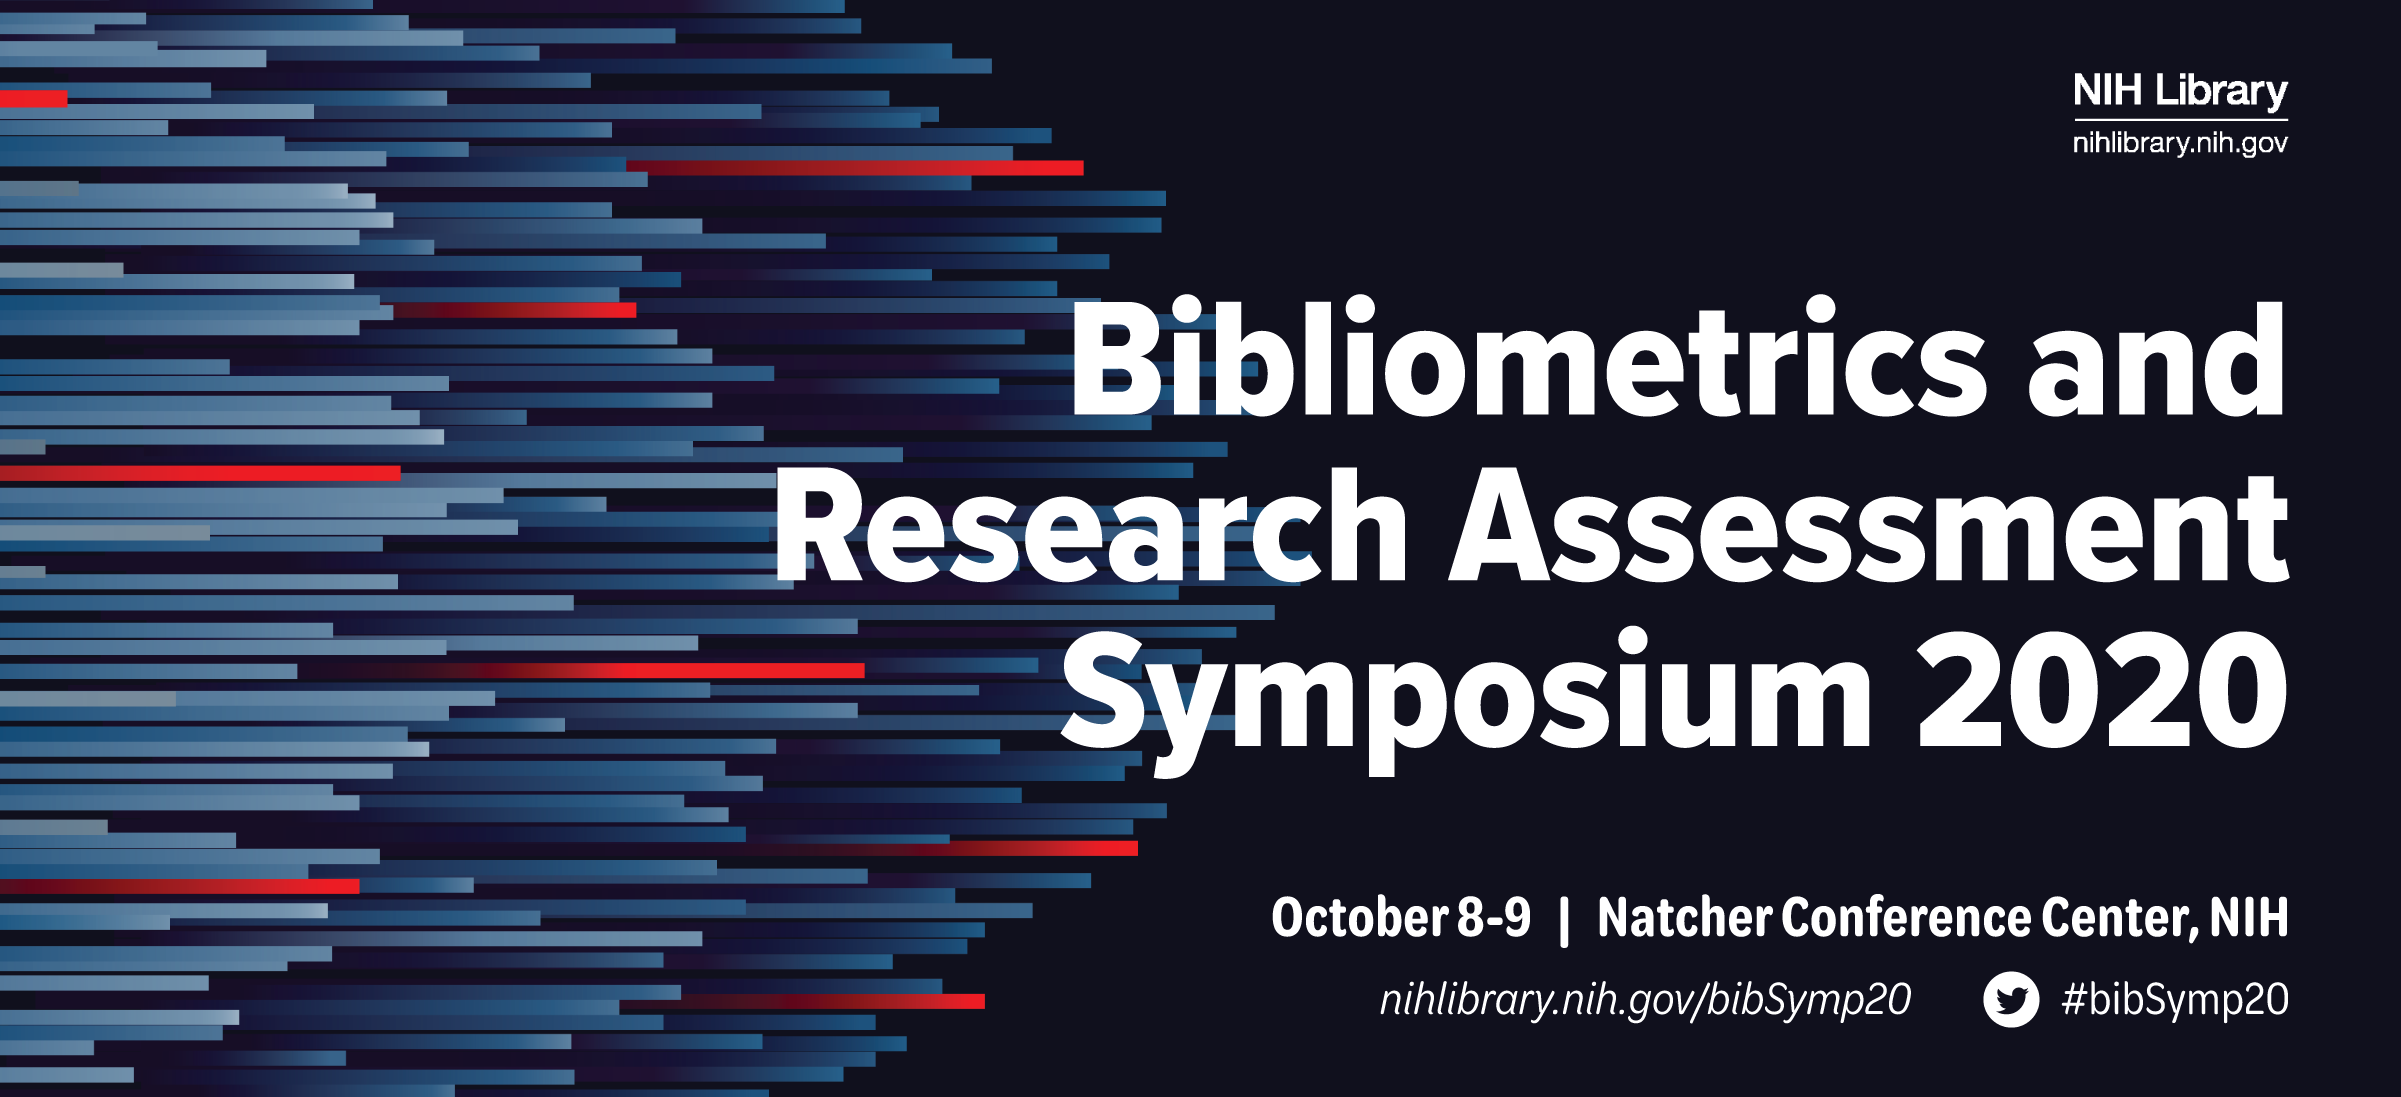 Save the Date: 2020 Bibliometrics and Research Assessment Symposium